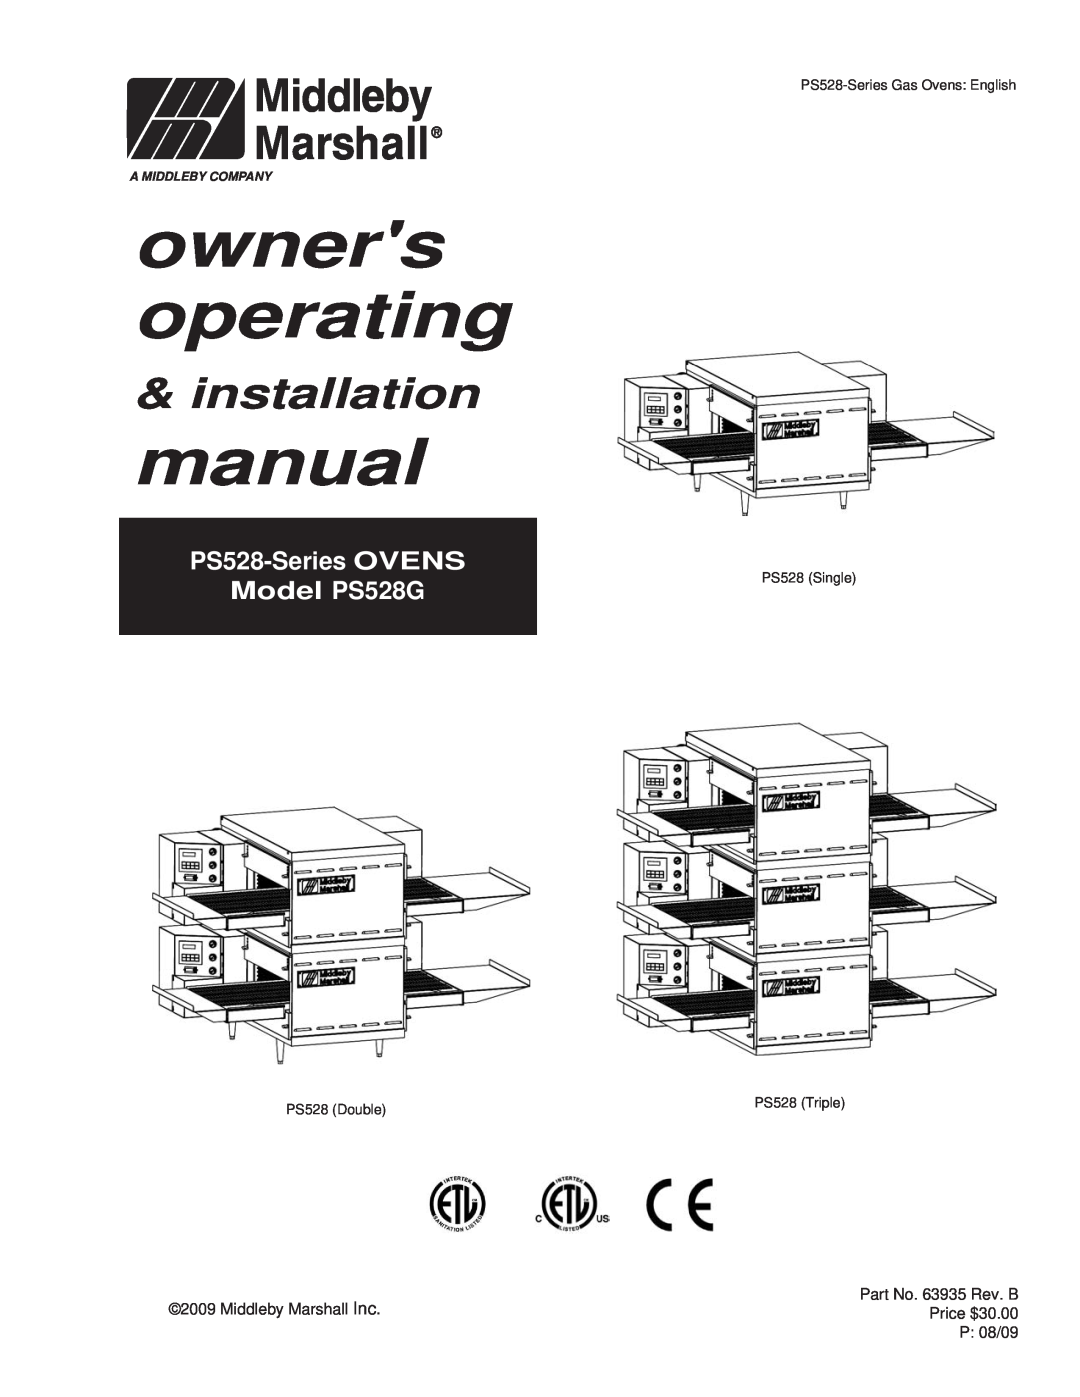 Middleby Marshall installation manual owners operating, PS528-Series OVENS Model PS528G, A Middleby Company 